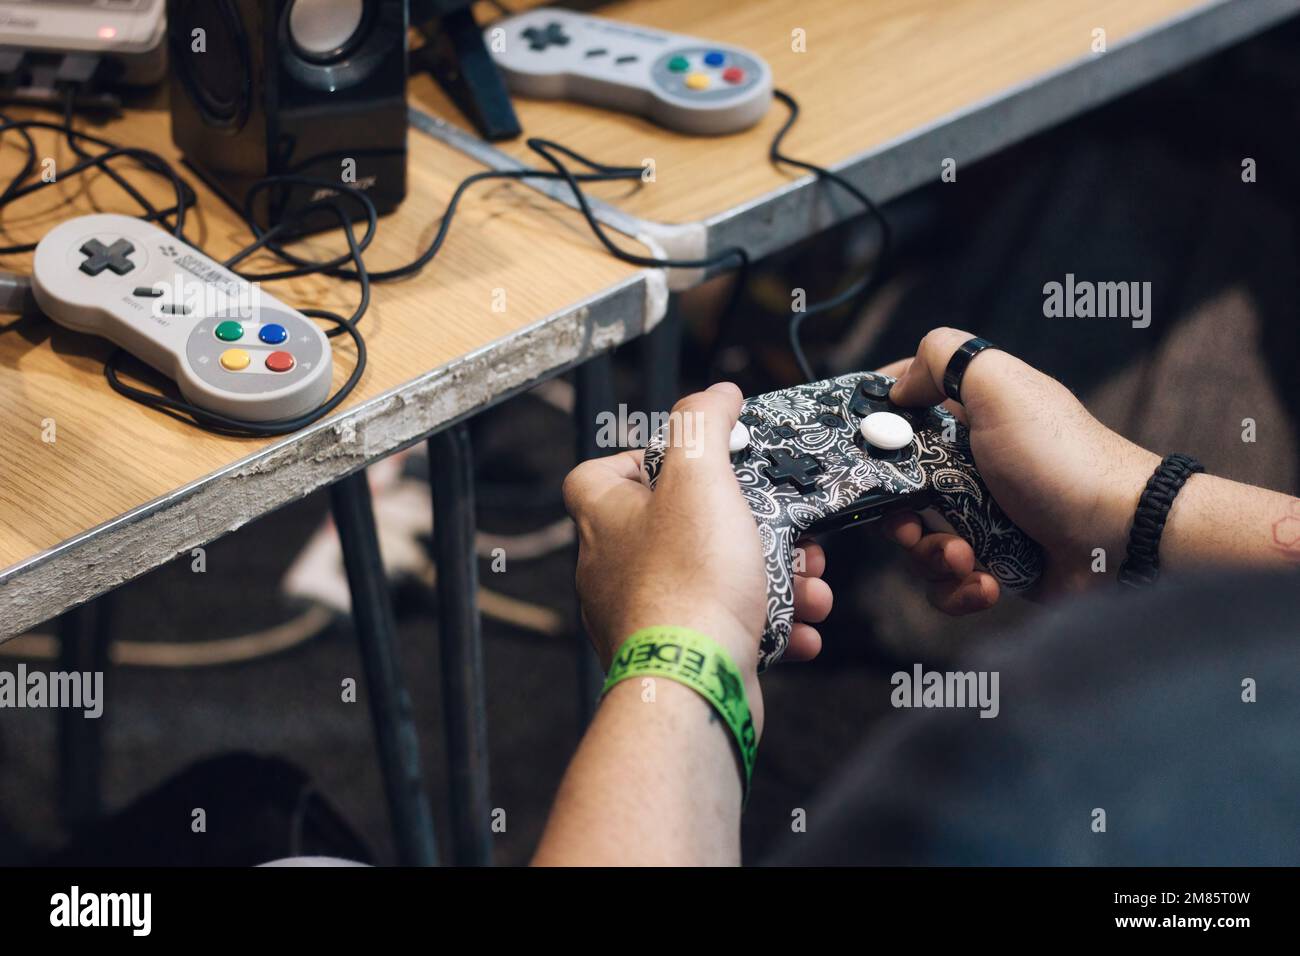 06 November 2022 - TaQali, Malta: Hands of a man playing a video game with a PlayStation controller Stock Photo